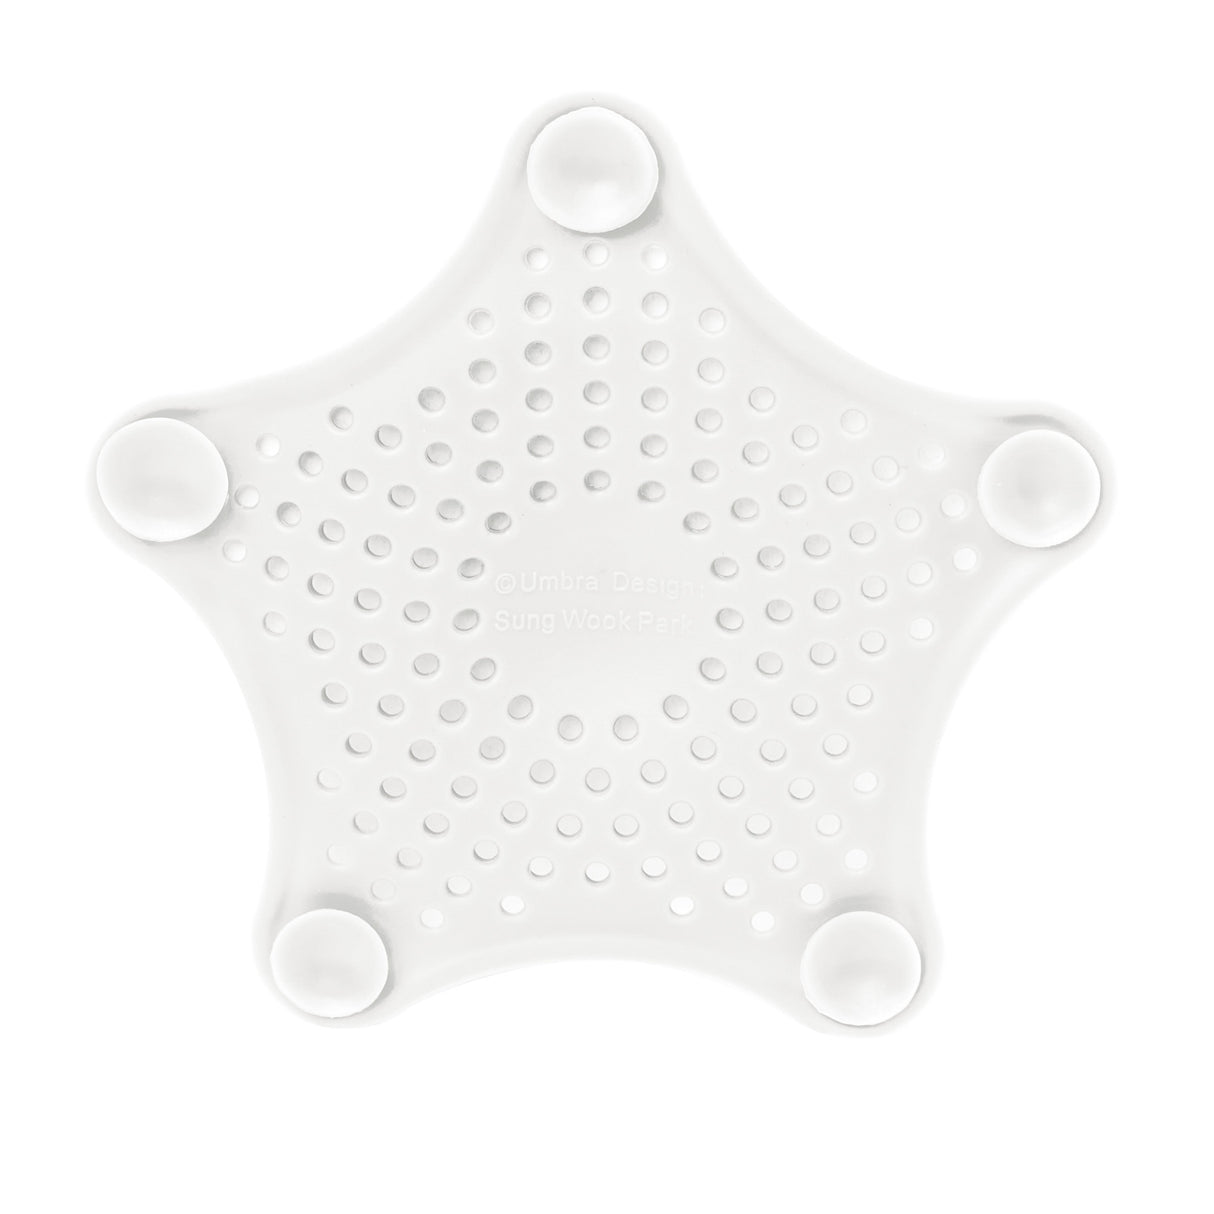 8 Pack Shower Hair Drain Catcher- Shower Hair Catcher Silicone Material is  Easy to Install, Prevent Debris from Clogging The Drain Bathtub Drain Cover,  Suitable for Bathtub and Kitchen